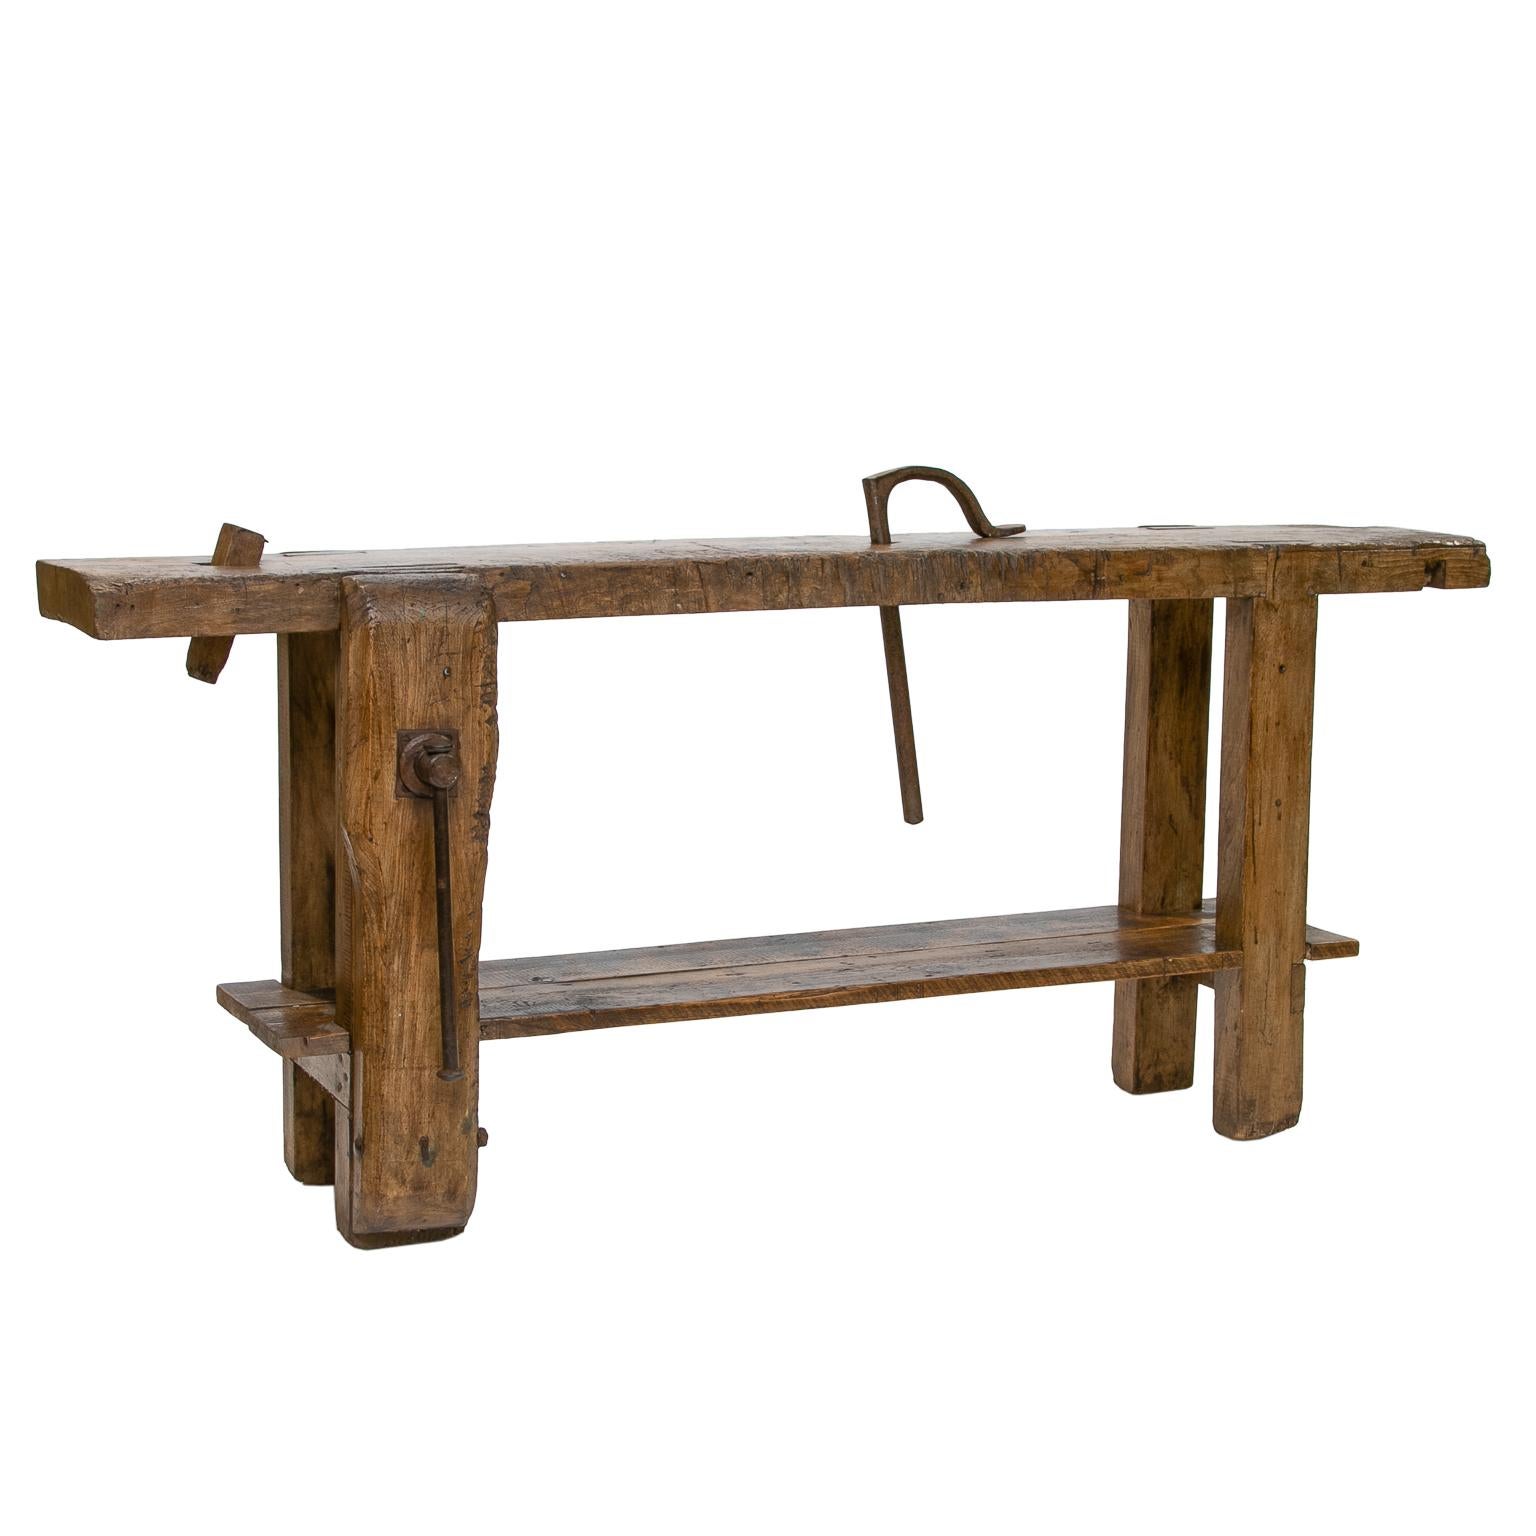 This antique French workbench is made of beechwood with a vice, a studded claw, and an iron clamp. This piece also has a lower shelf and all parts are fully functional. The size of this piece is great for use as a narrow console.